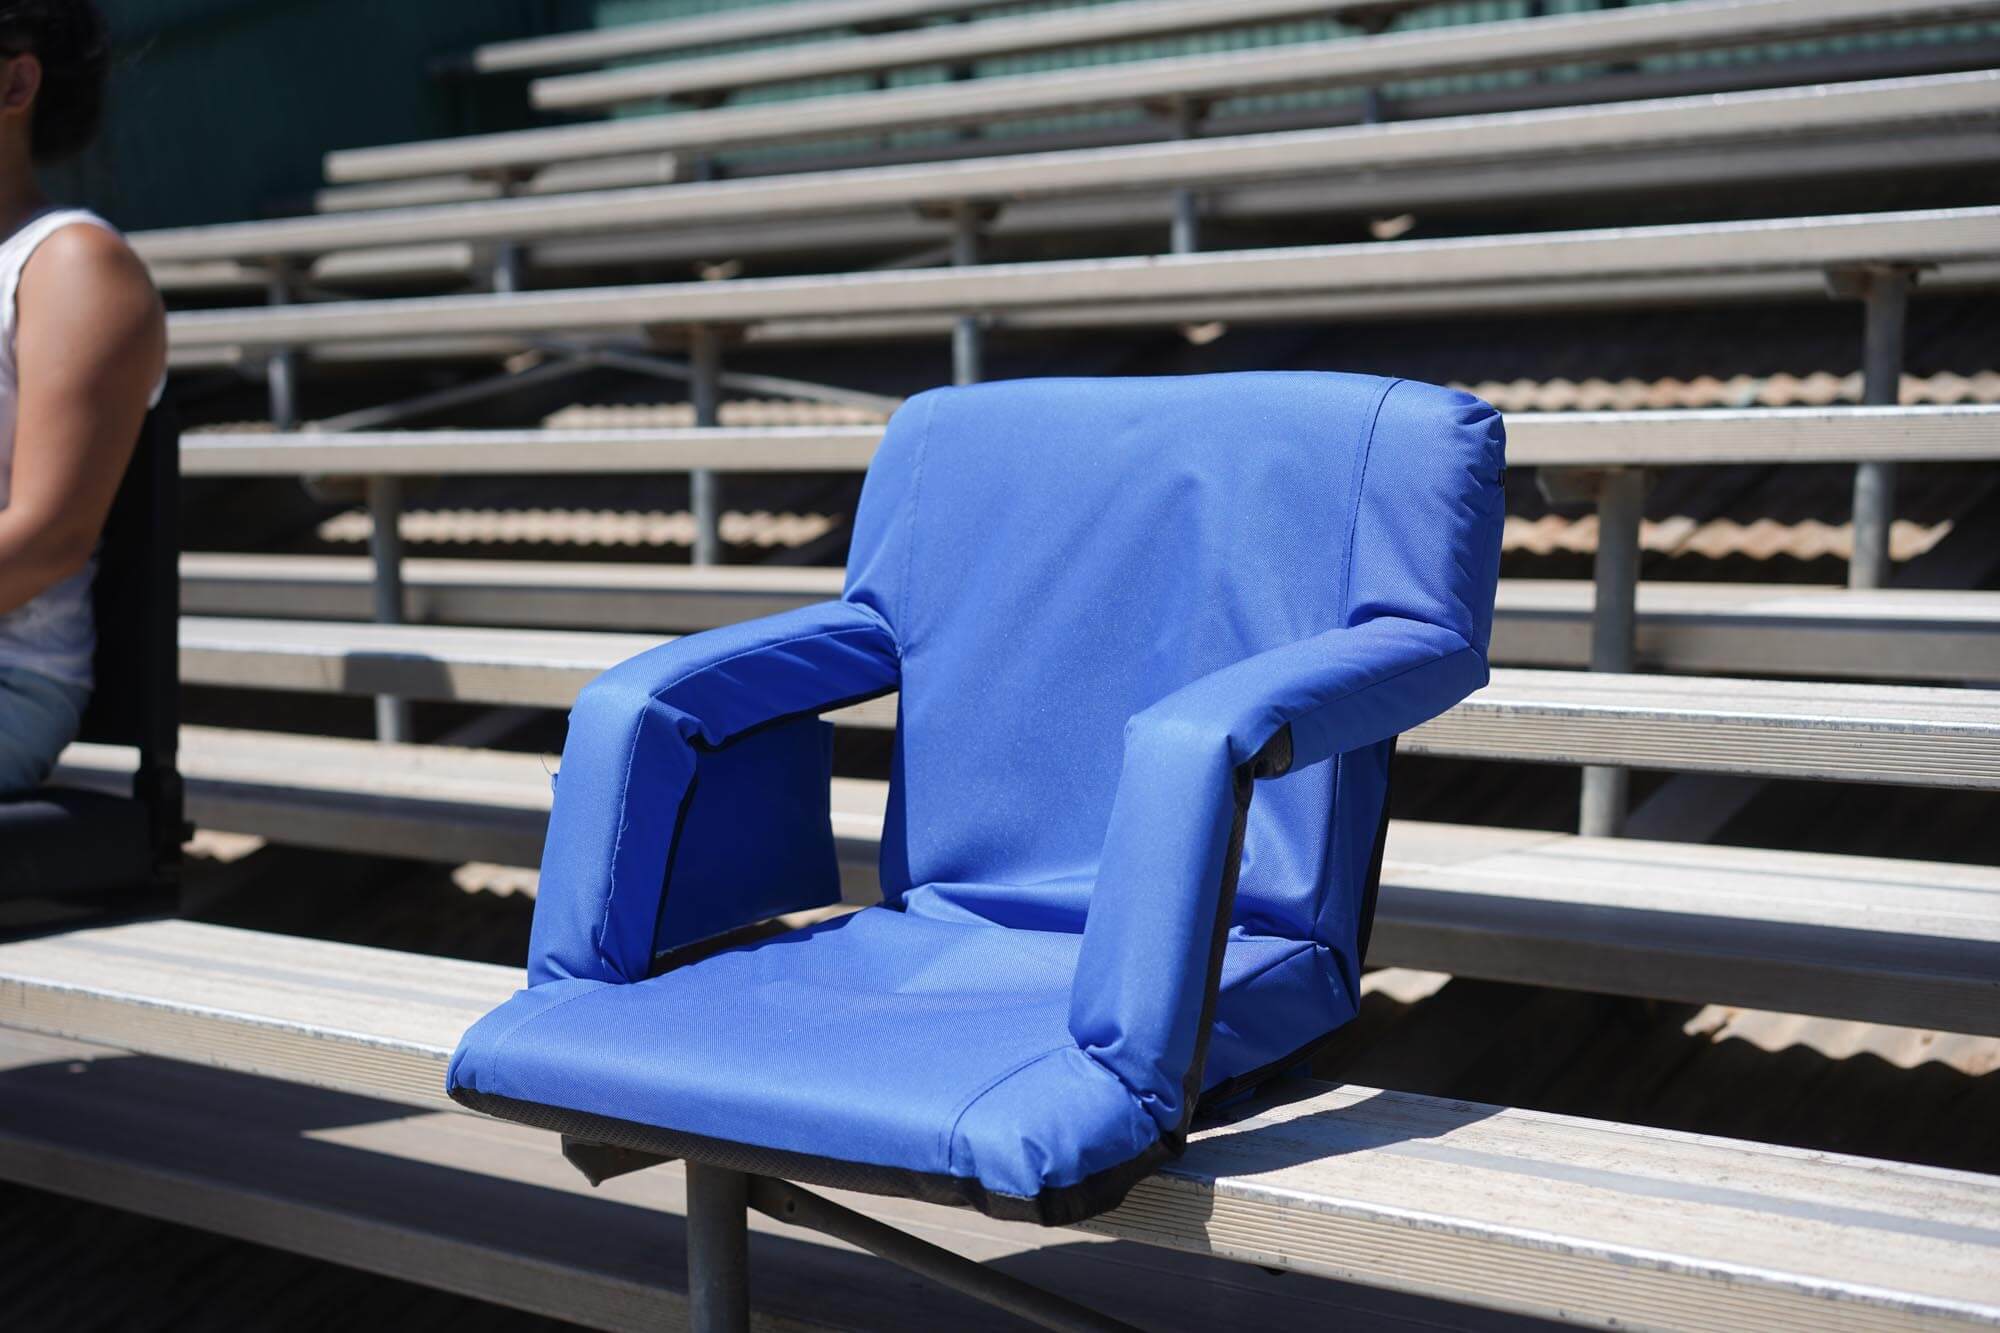 Padded Bleacher Stadium Seat Cushion, Best quality Seat Cushion For Any  Sporting Event Made In USA.